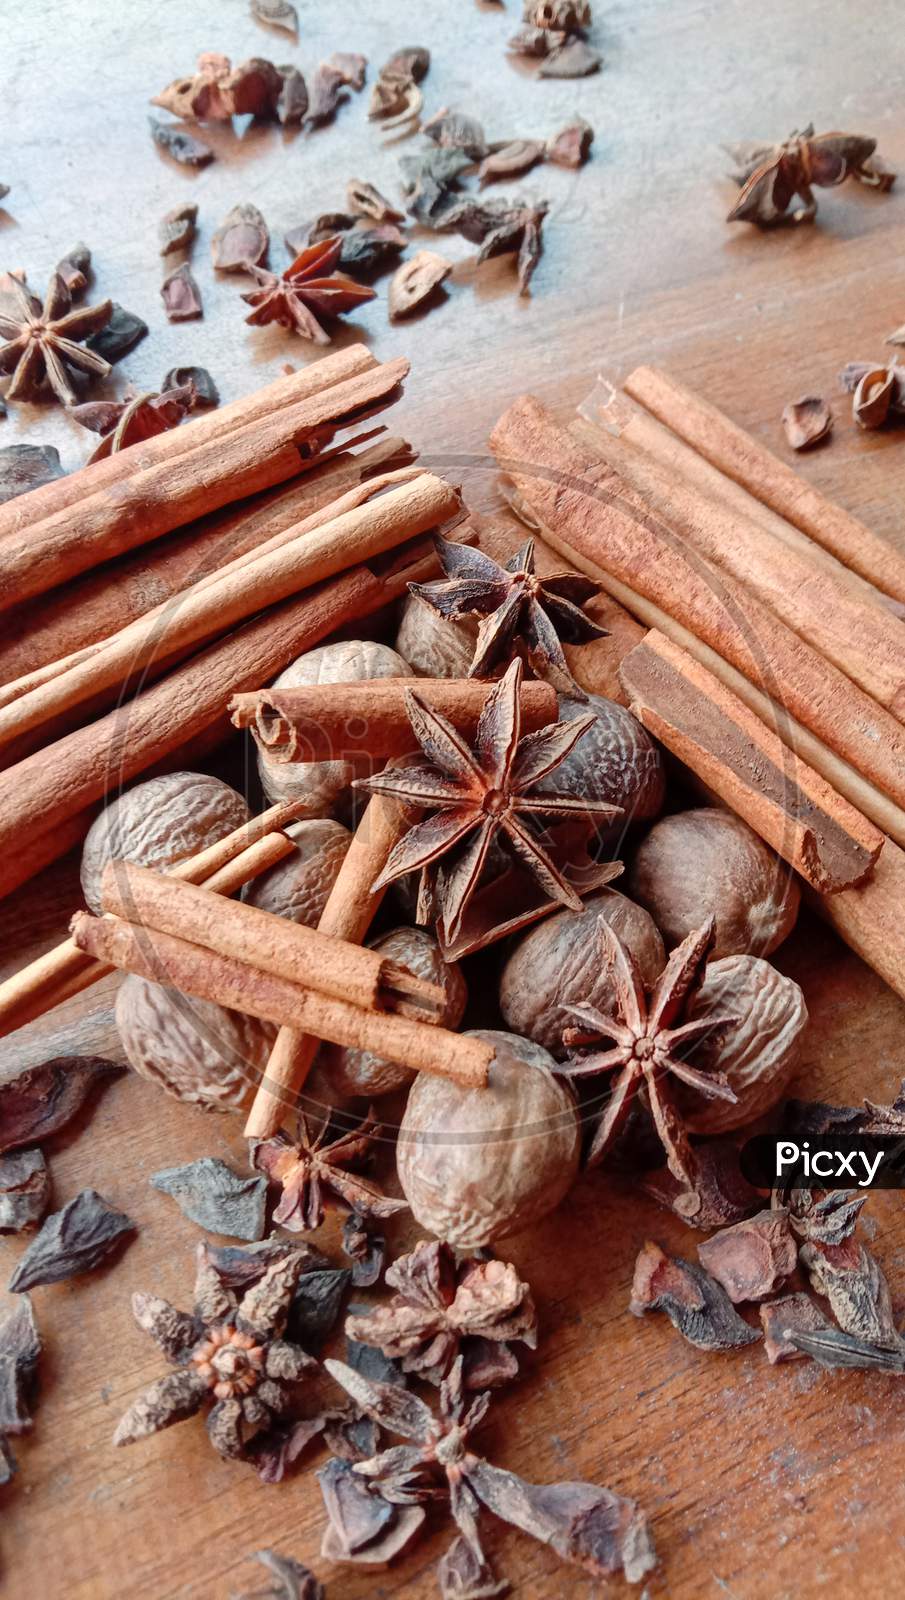 Photos Of Authentic Indonesian Spices Such As Cinnamon, Anise, Cumin And Nutmeg